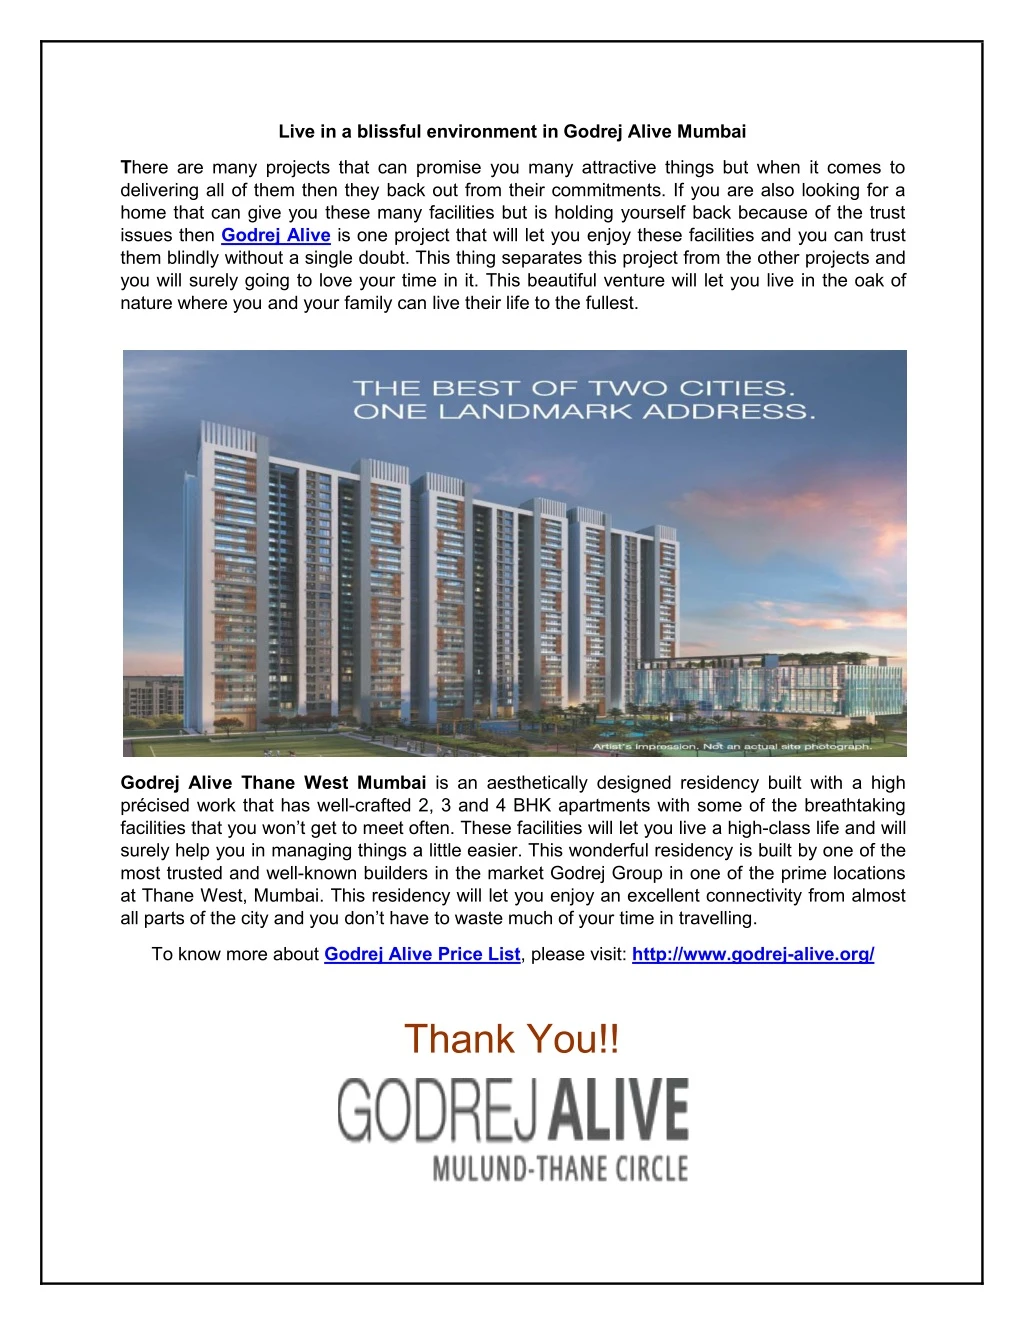 live in a blissful environment in godrej alive